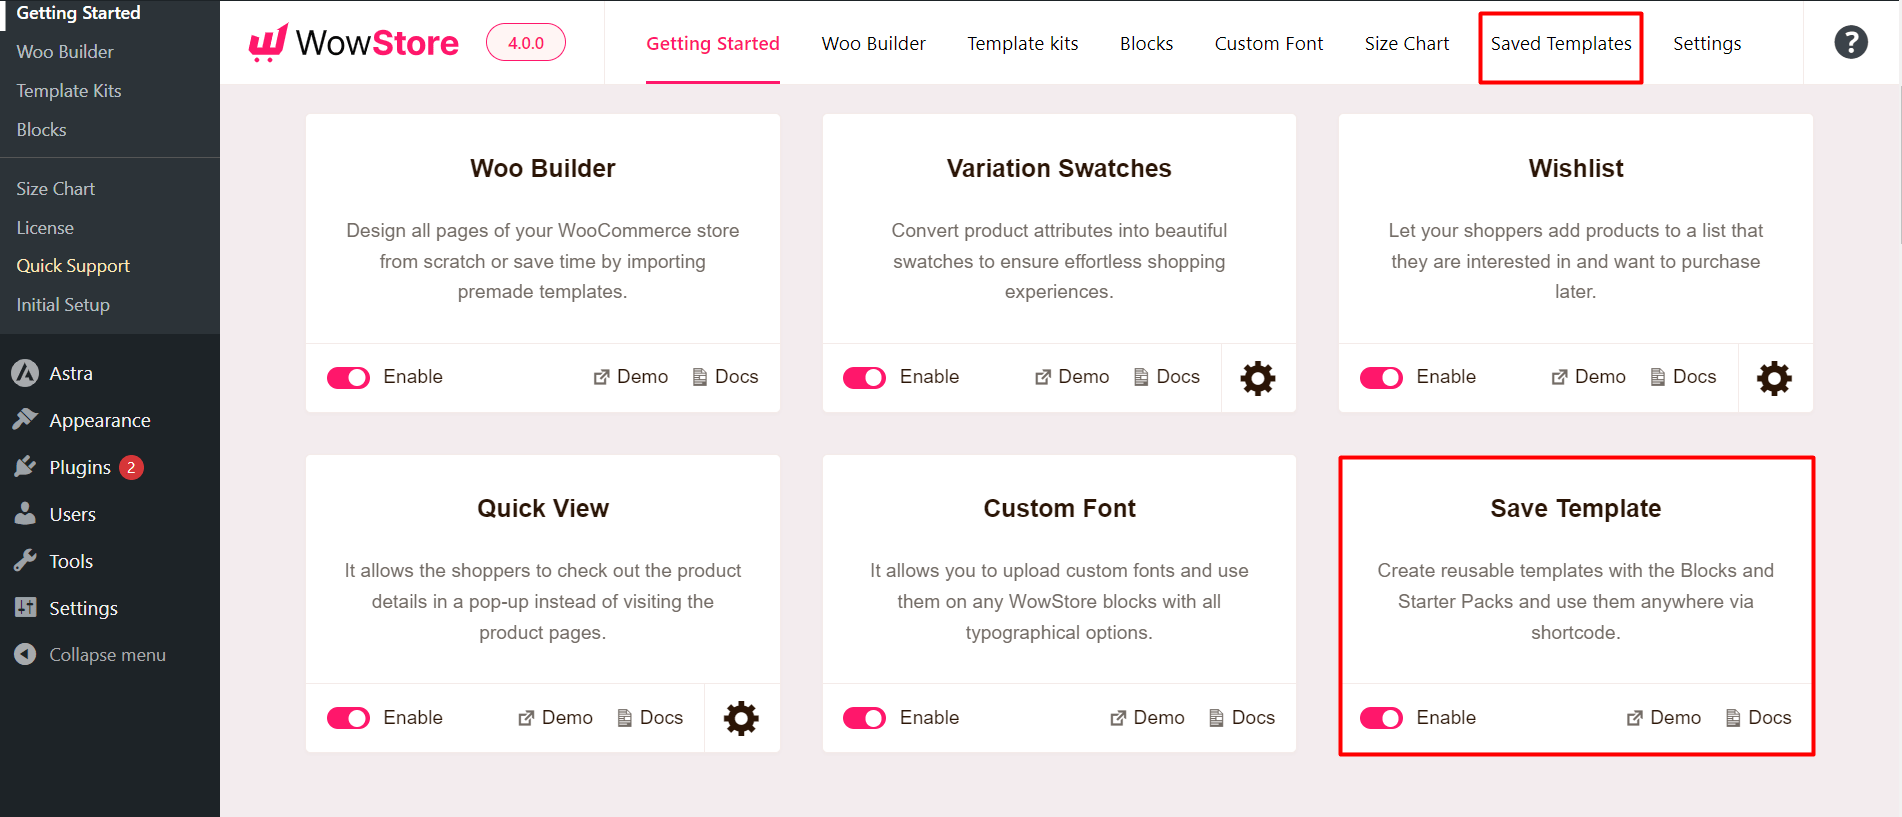 Enabling the WowStore Saved Templates Addon